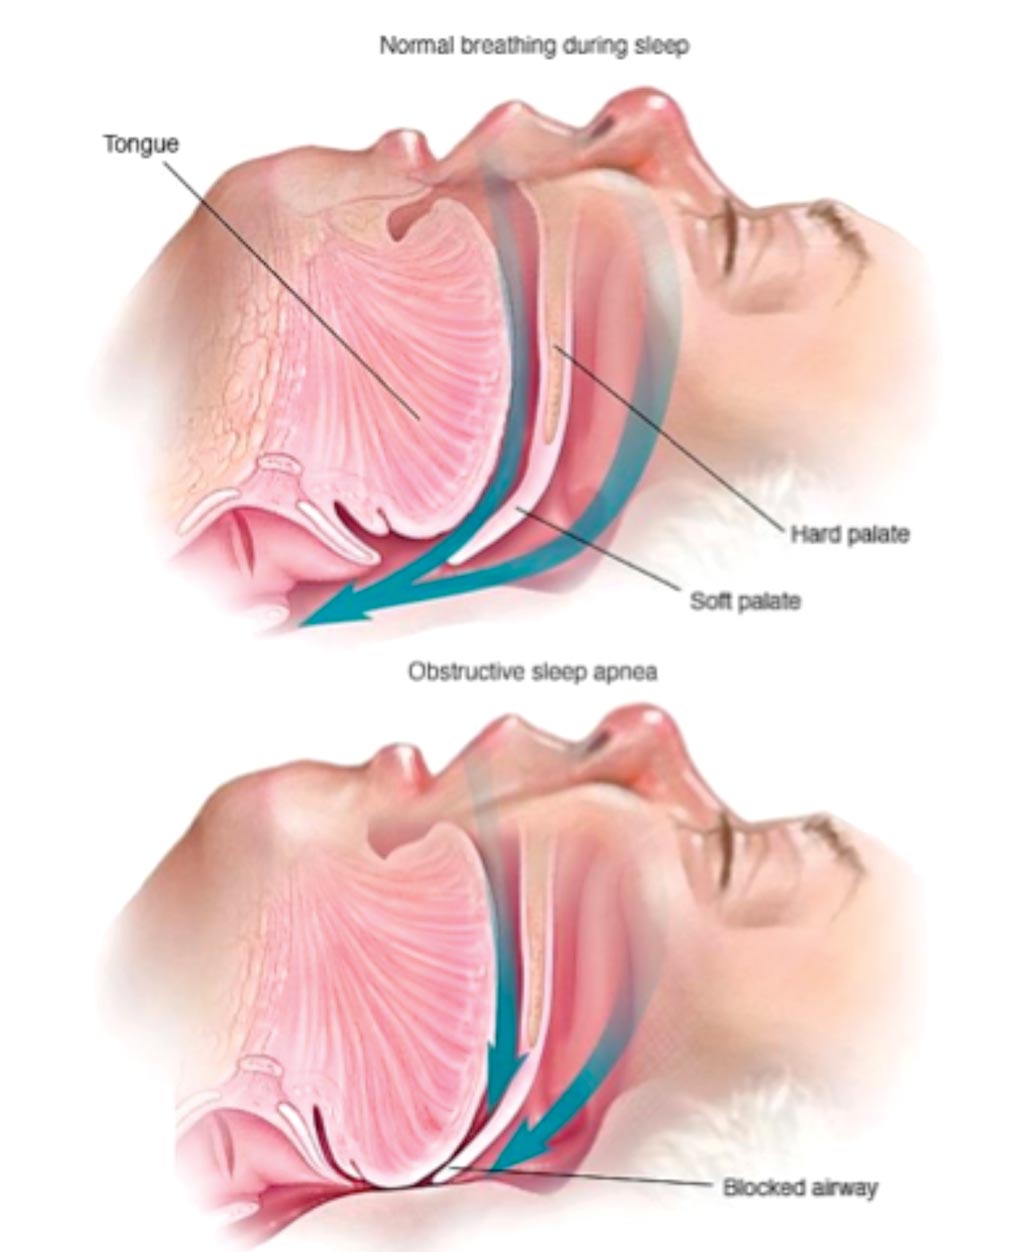 Image: An illustration of obstructive sleep apnea compared to normal breathing during sleep (Photo courtesy of Mayo Clinic).